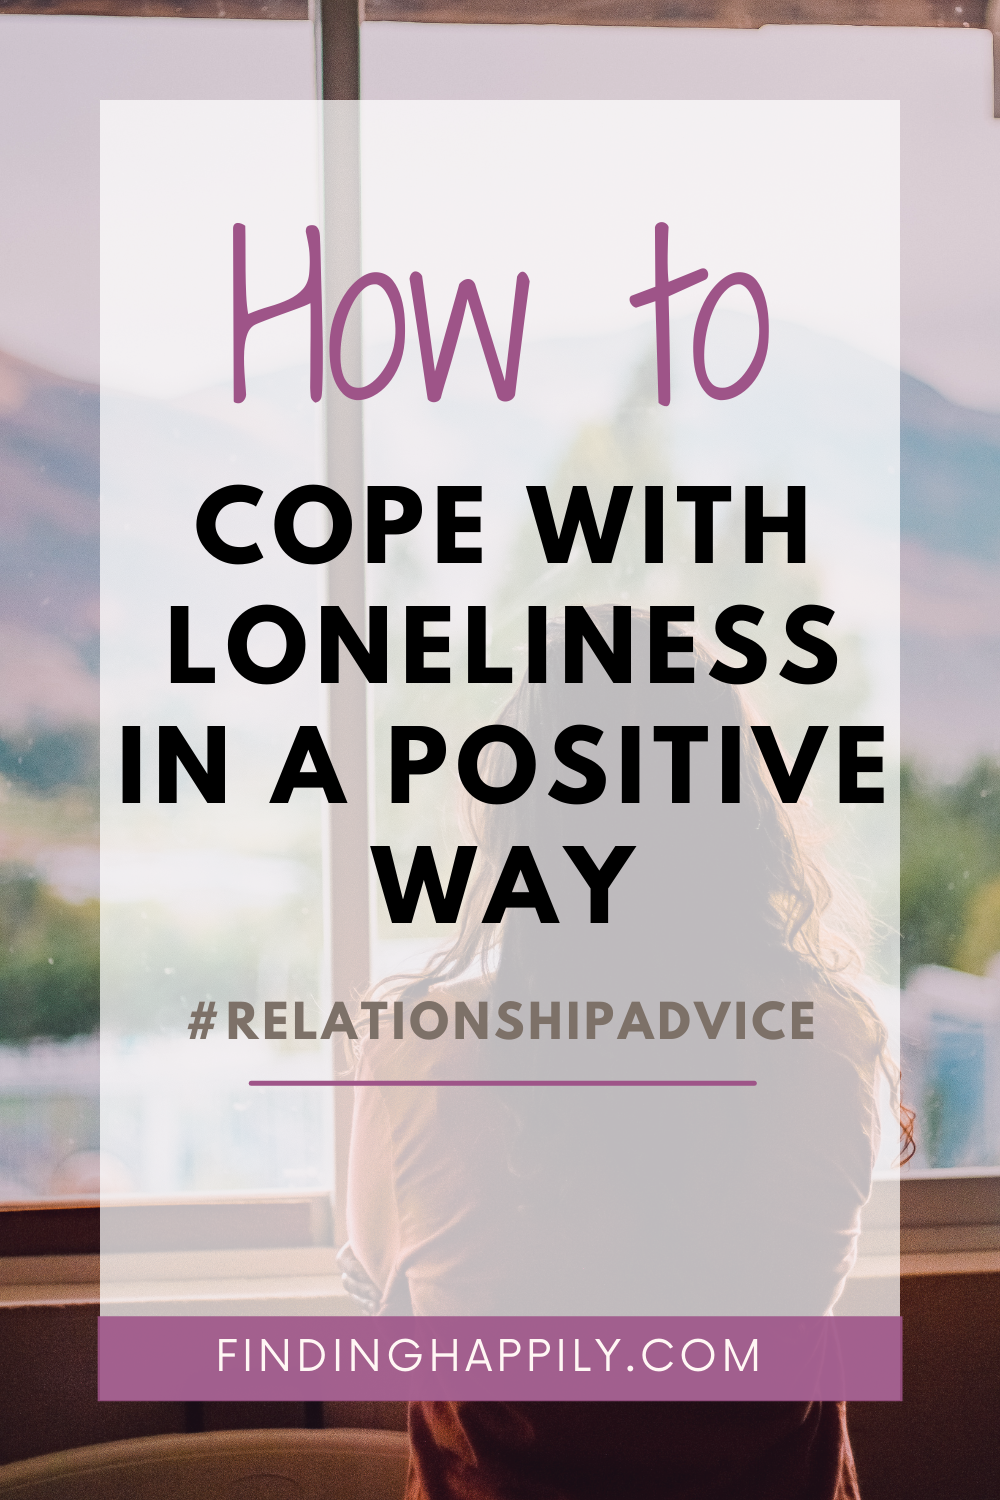 3 ways to cope with loneliness in a positive way